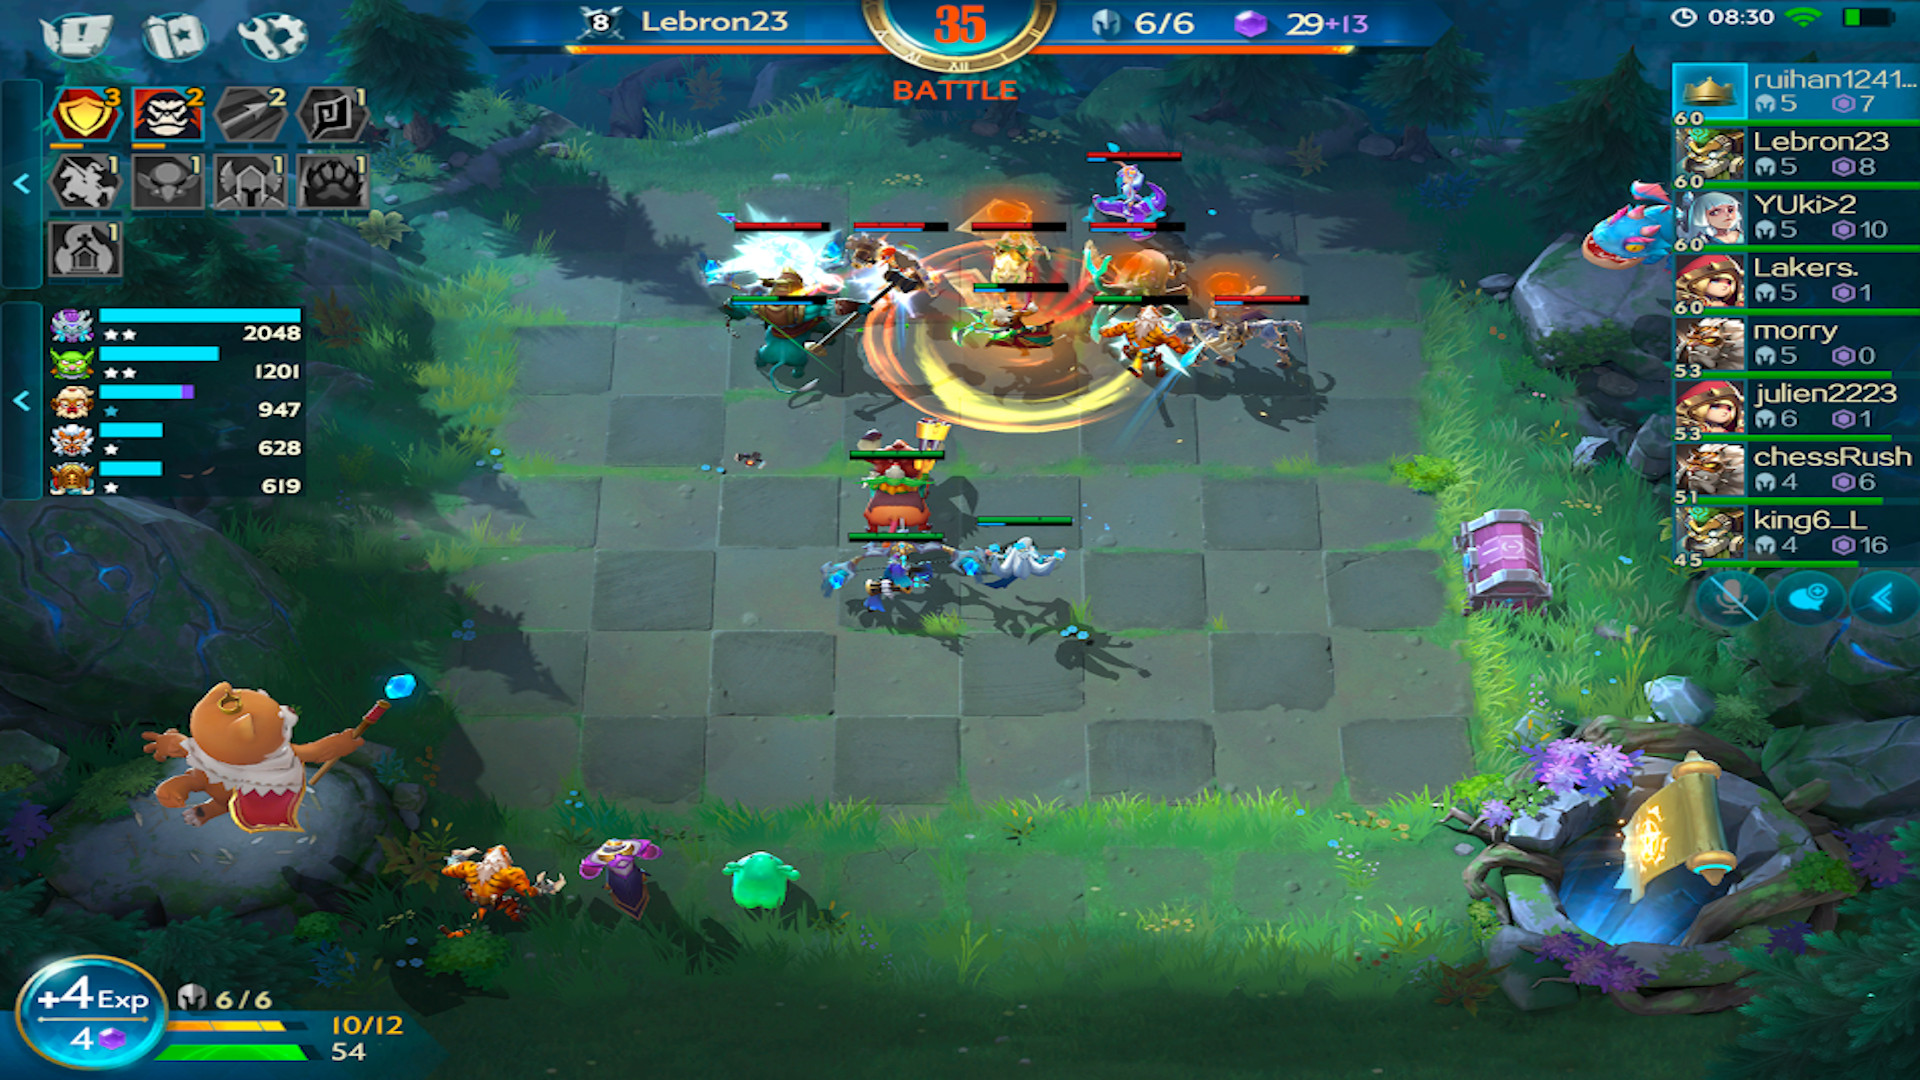 Auto Chess on mobile is improving  but confusing